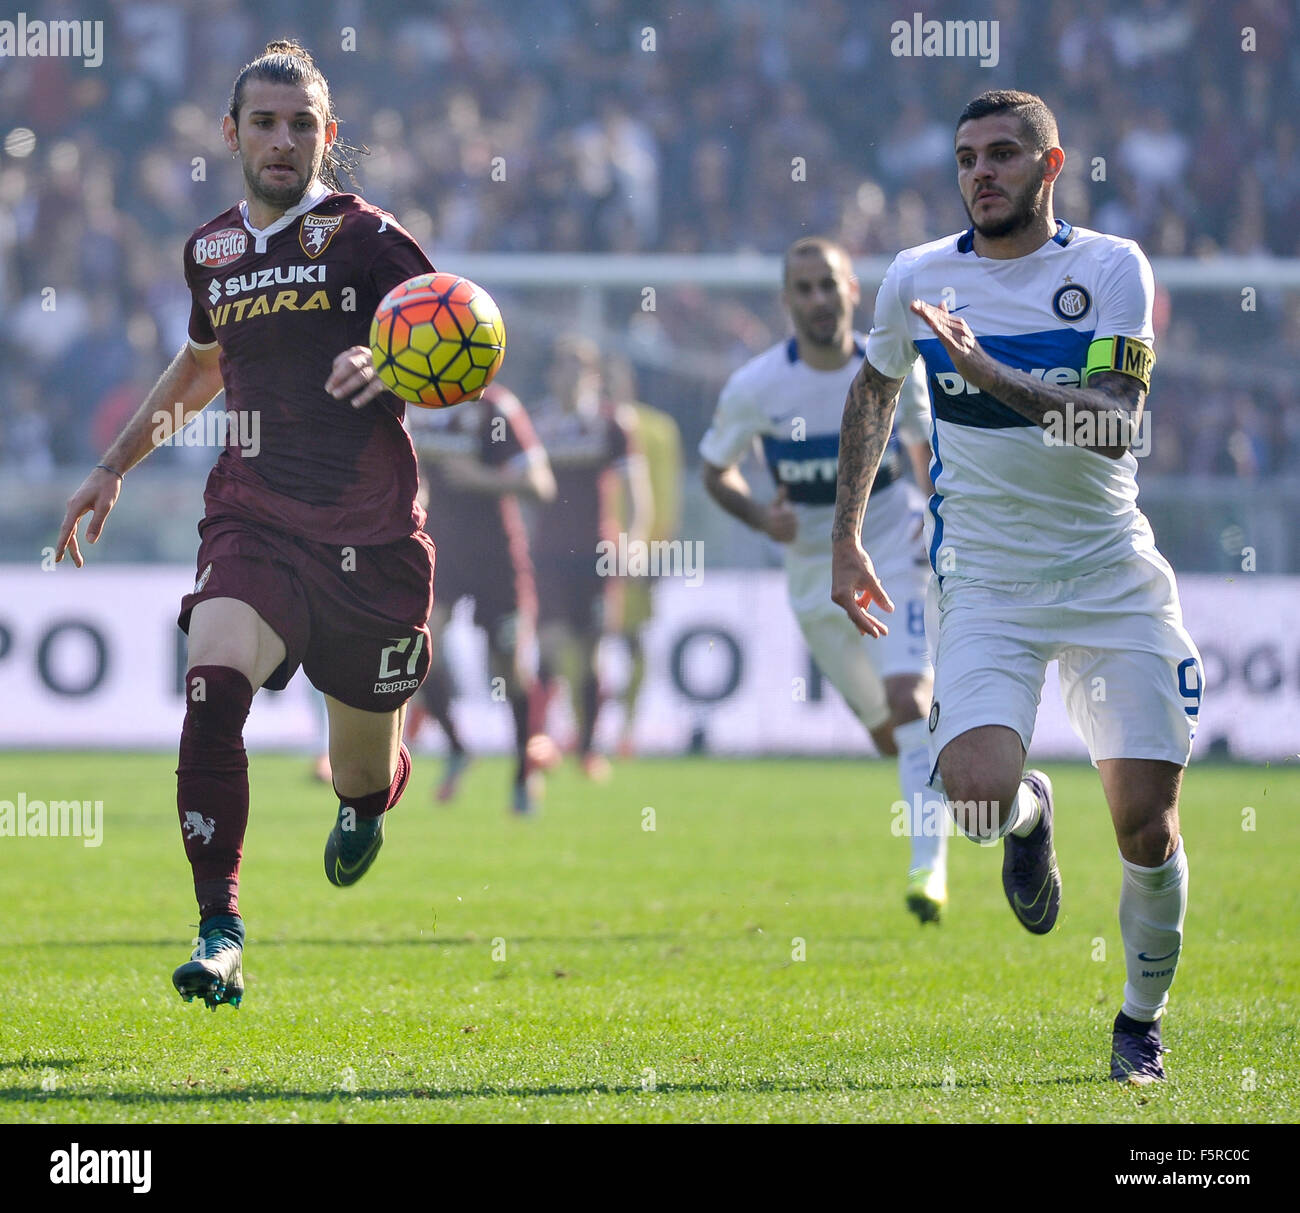 Turin, Italy. 08th Nov, 2015. Gaston Silva (left) e Mauro Icardi (right) fight for the ball during the Serie A match between Torino FC and FC Internazionale. Credit:  Nicolò Campo/Pacific Press/Alamy Live News Stock Photo